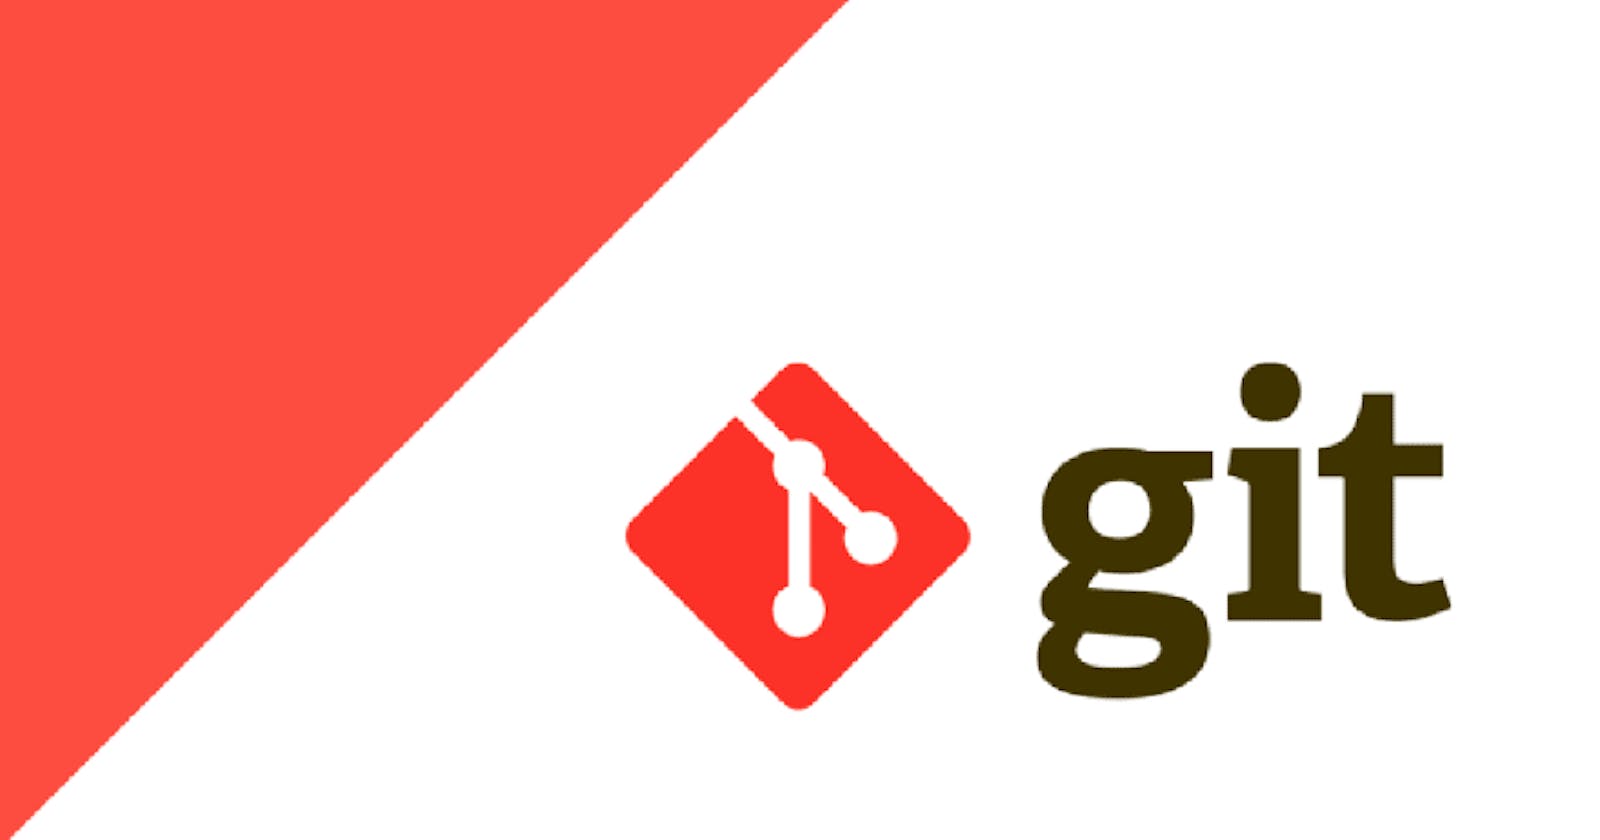 An essential guide on what is git and how use to git and github.